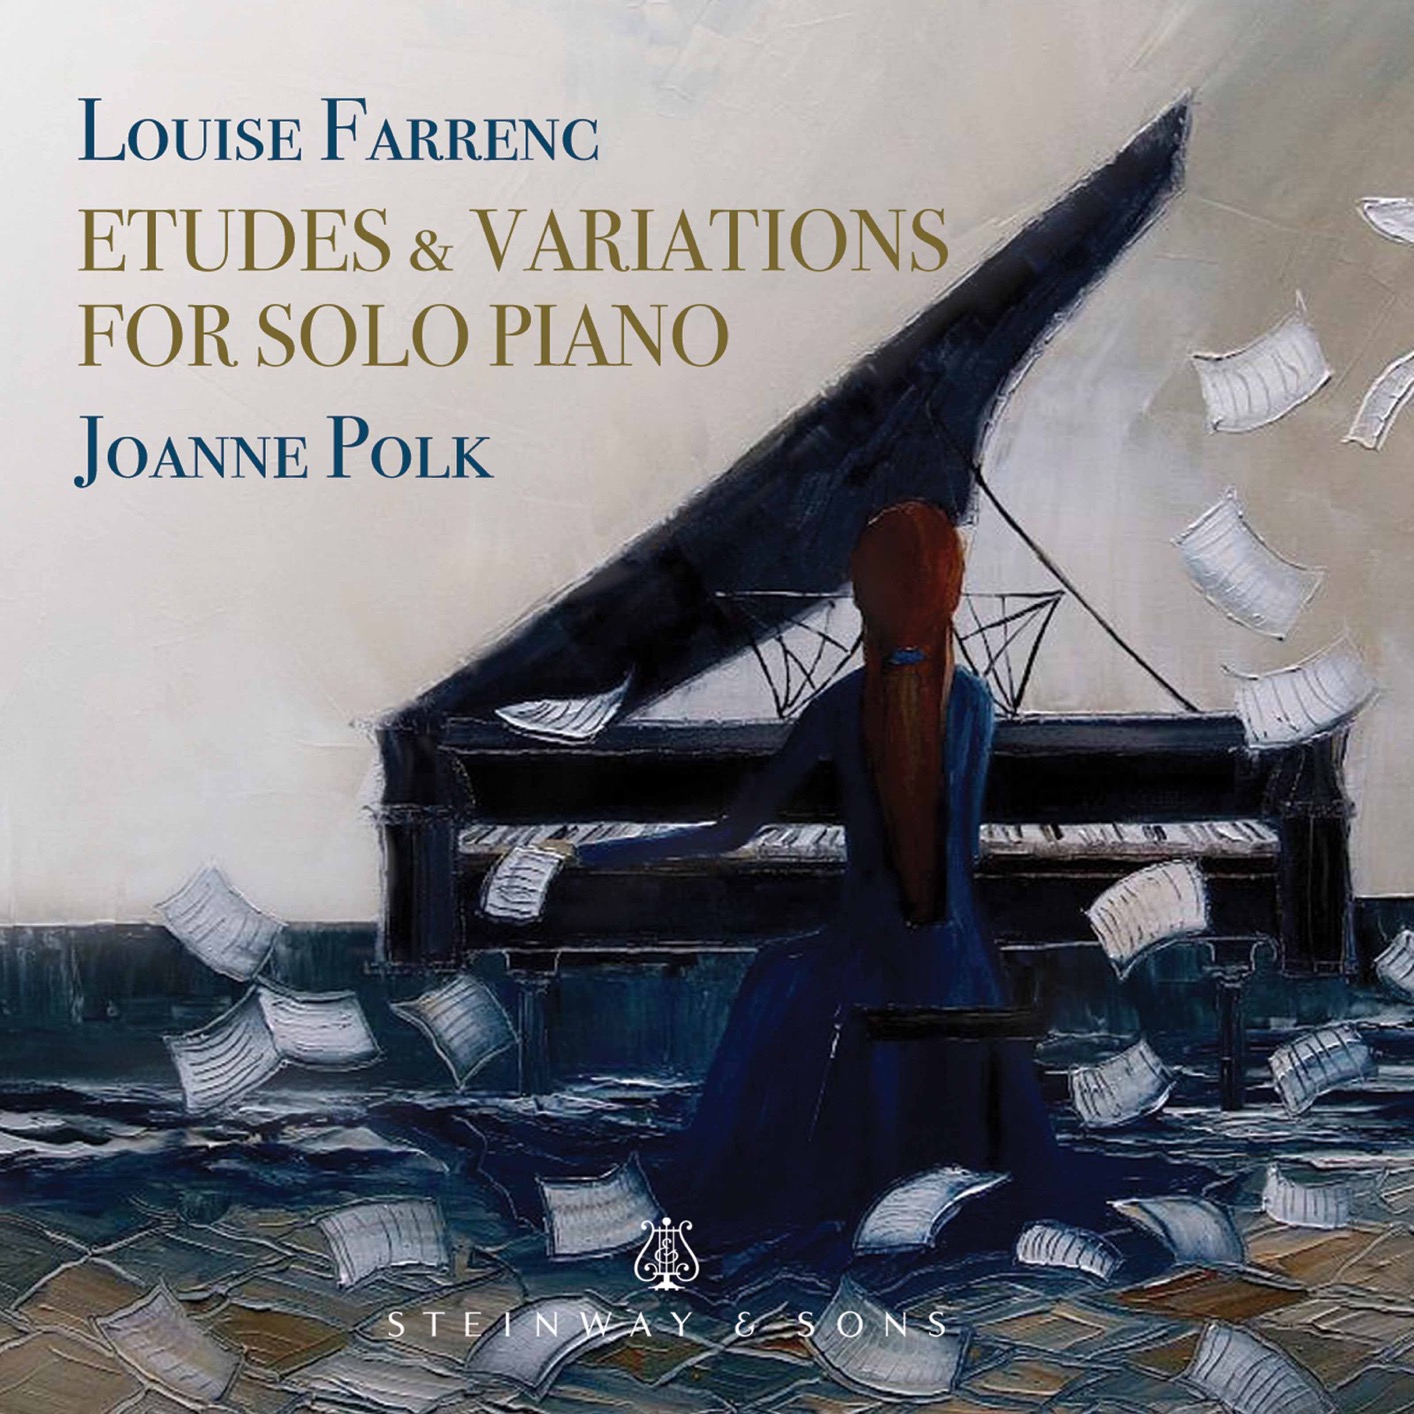 Joanne Polk – Louise Farrenc: Etudes & Variations for Solo Piano (2020) [FLAC 24bit/96kHz]